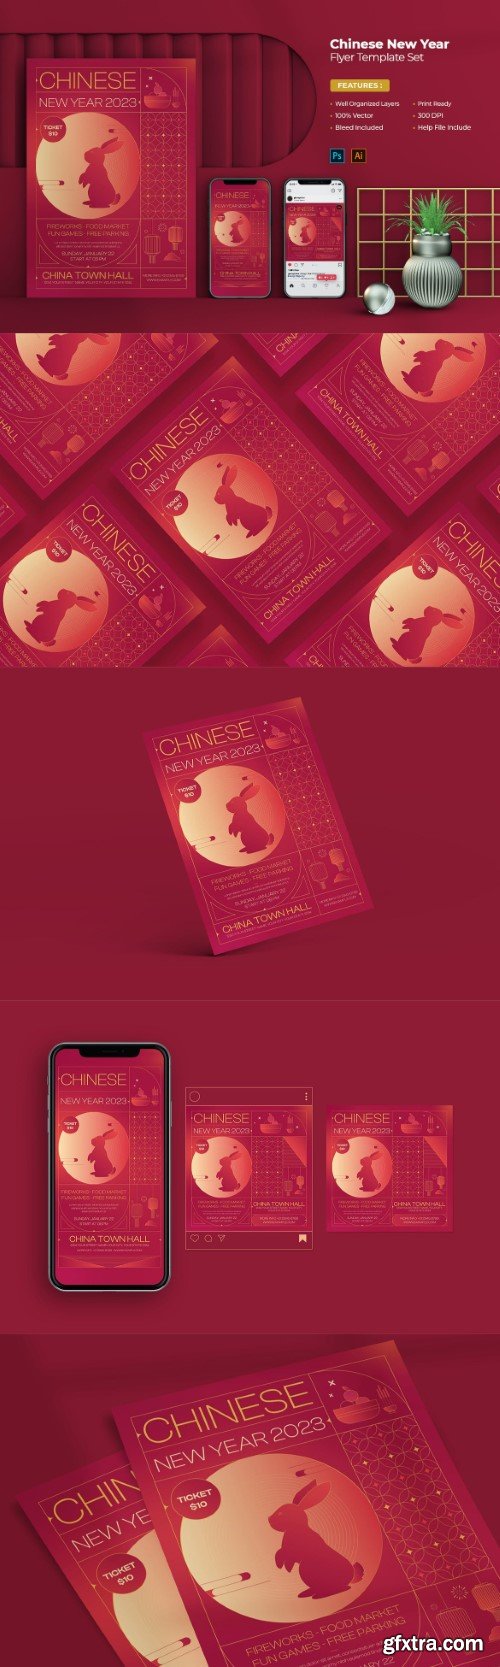 Chinese New Year Flyer Template Set